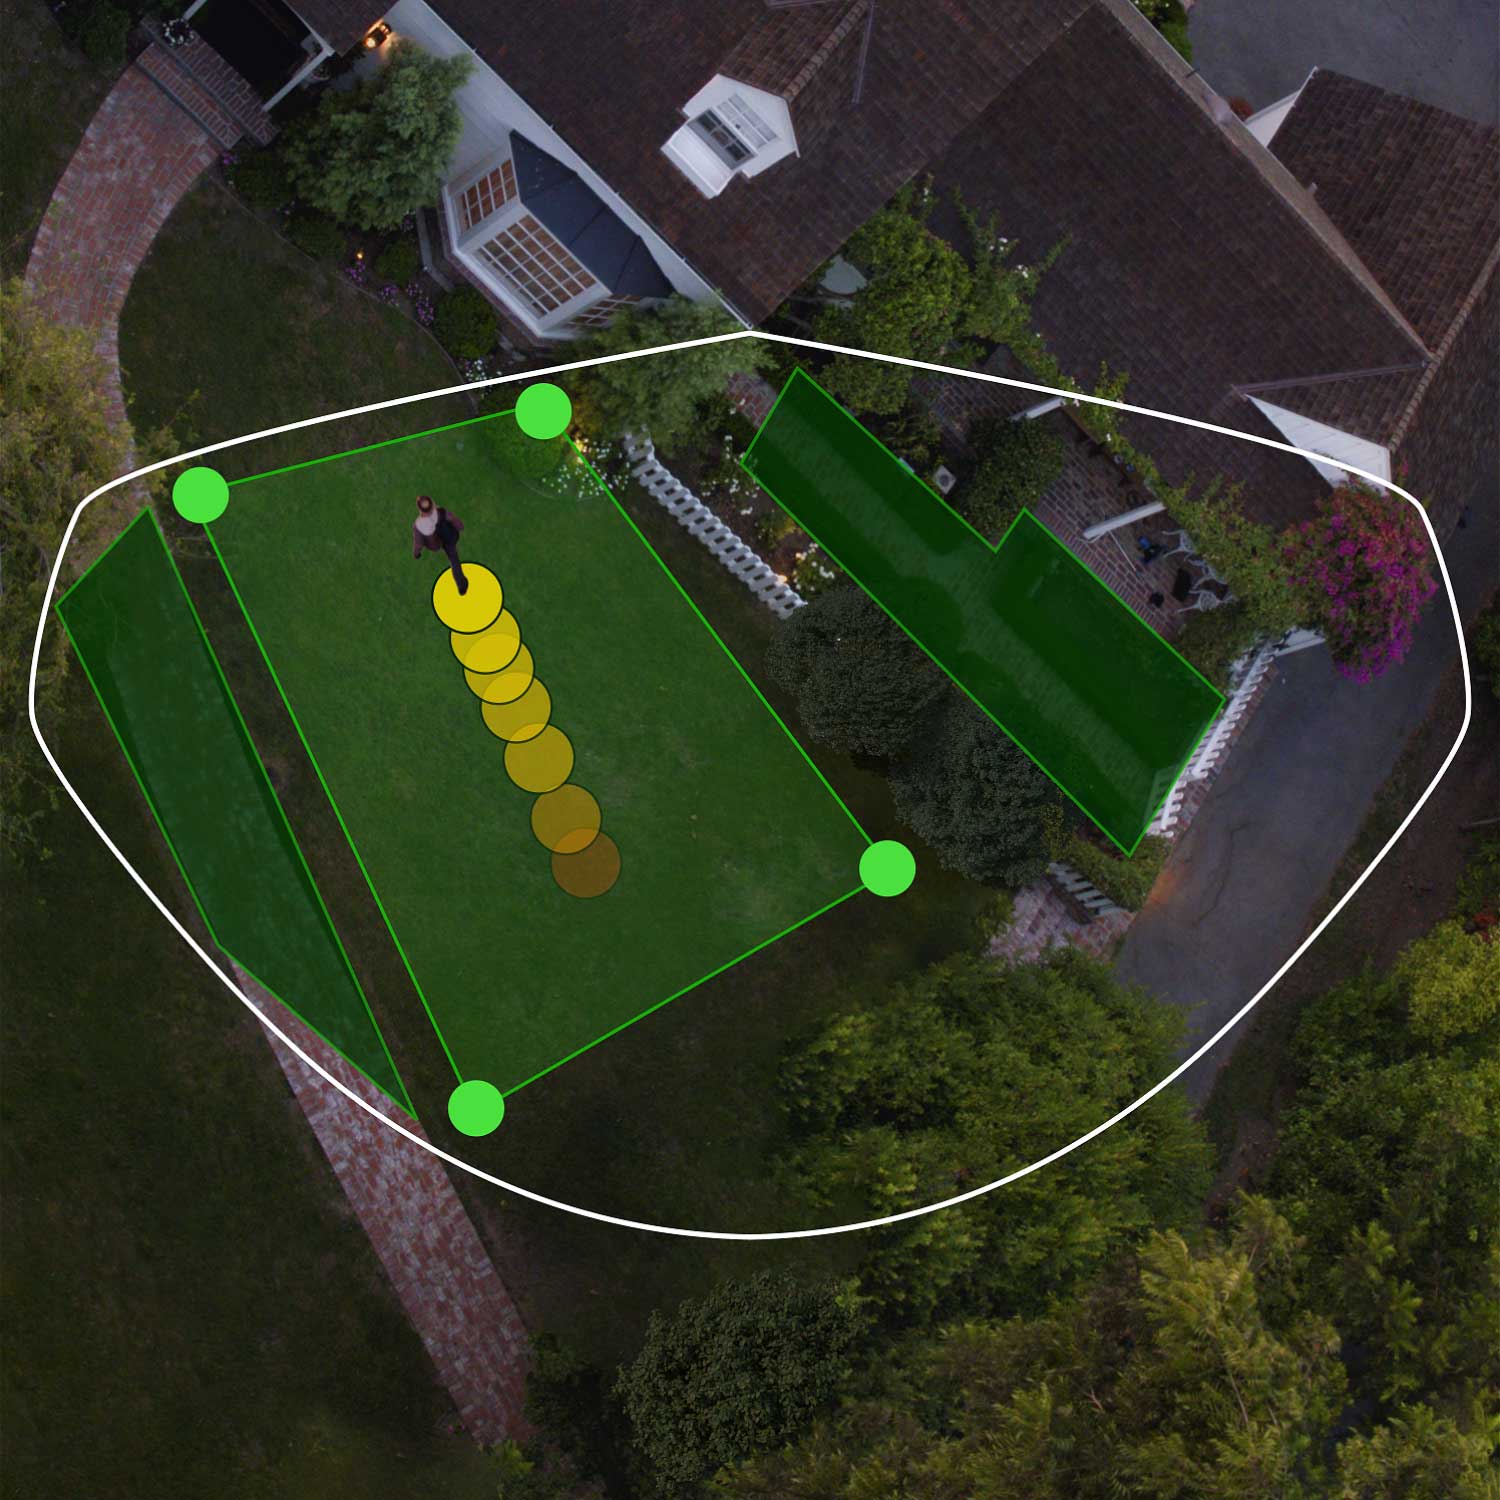 Spotlight Cam Pro (Wired) - Aerial view of front of house showing bird's eye view zones in green. Person walks toward front door, their path indicated by yellow dots.